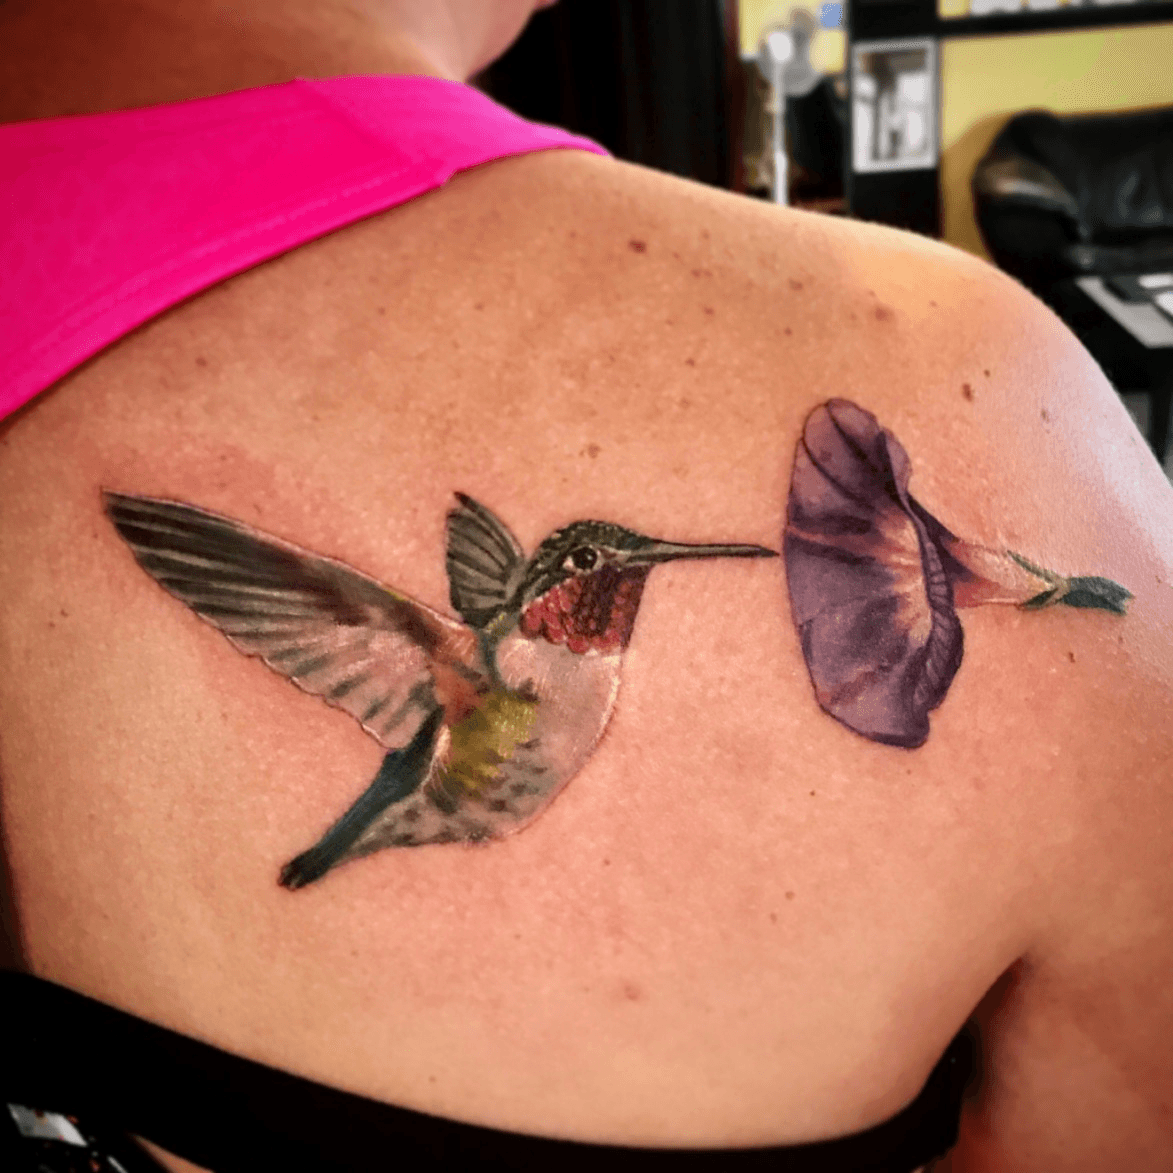 Hummingbird tattoo as part of back piece by InkCaptain on DeviantArt